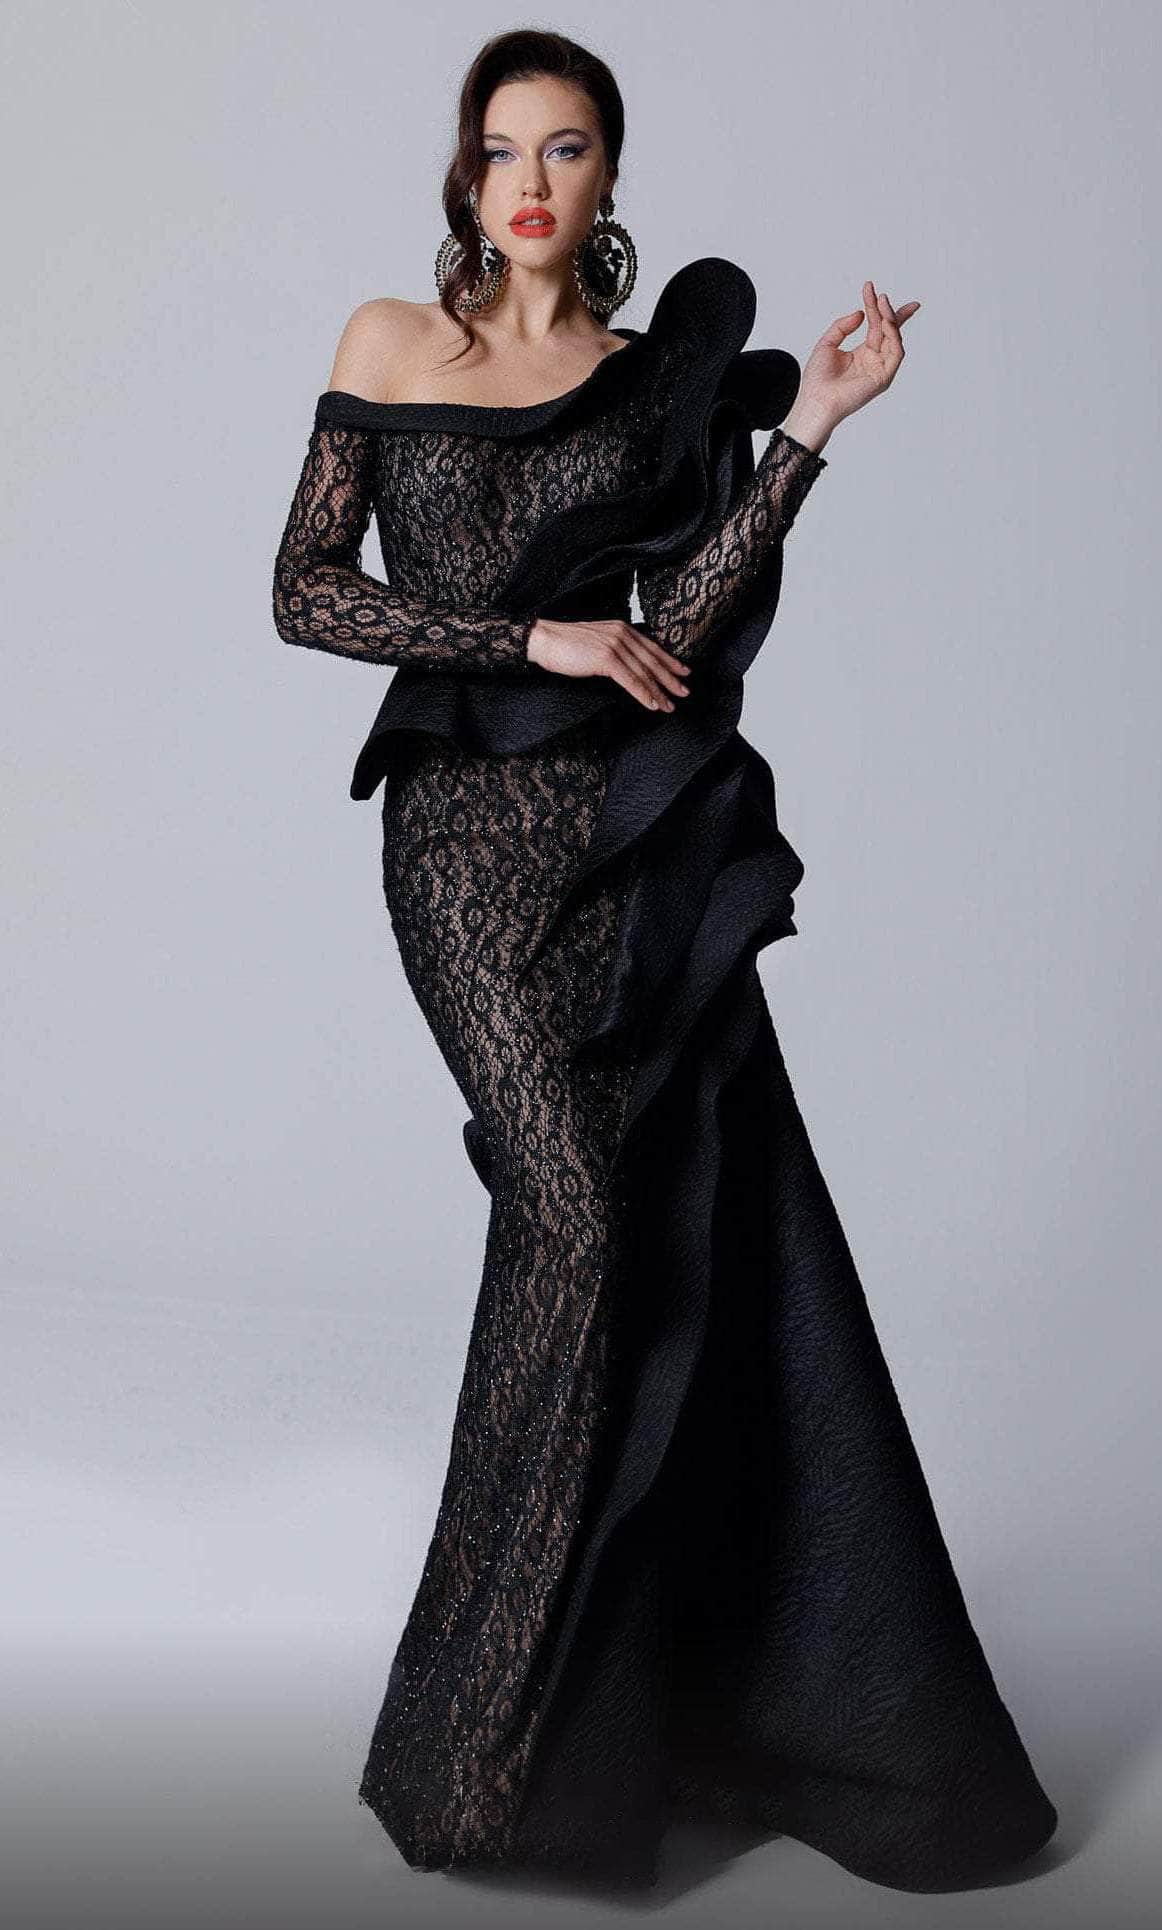 MNM Couture 2735 - Asymmetric Beaded Lace Evening Gown
